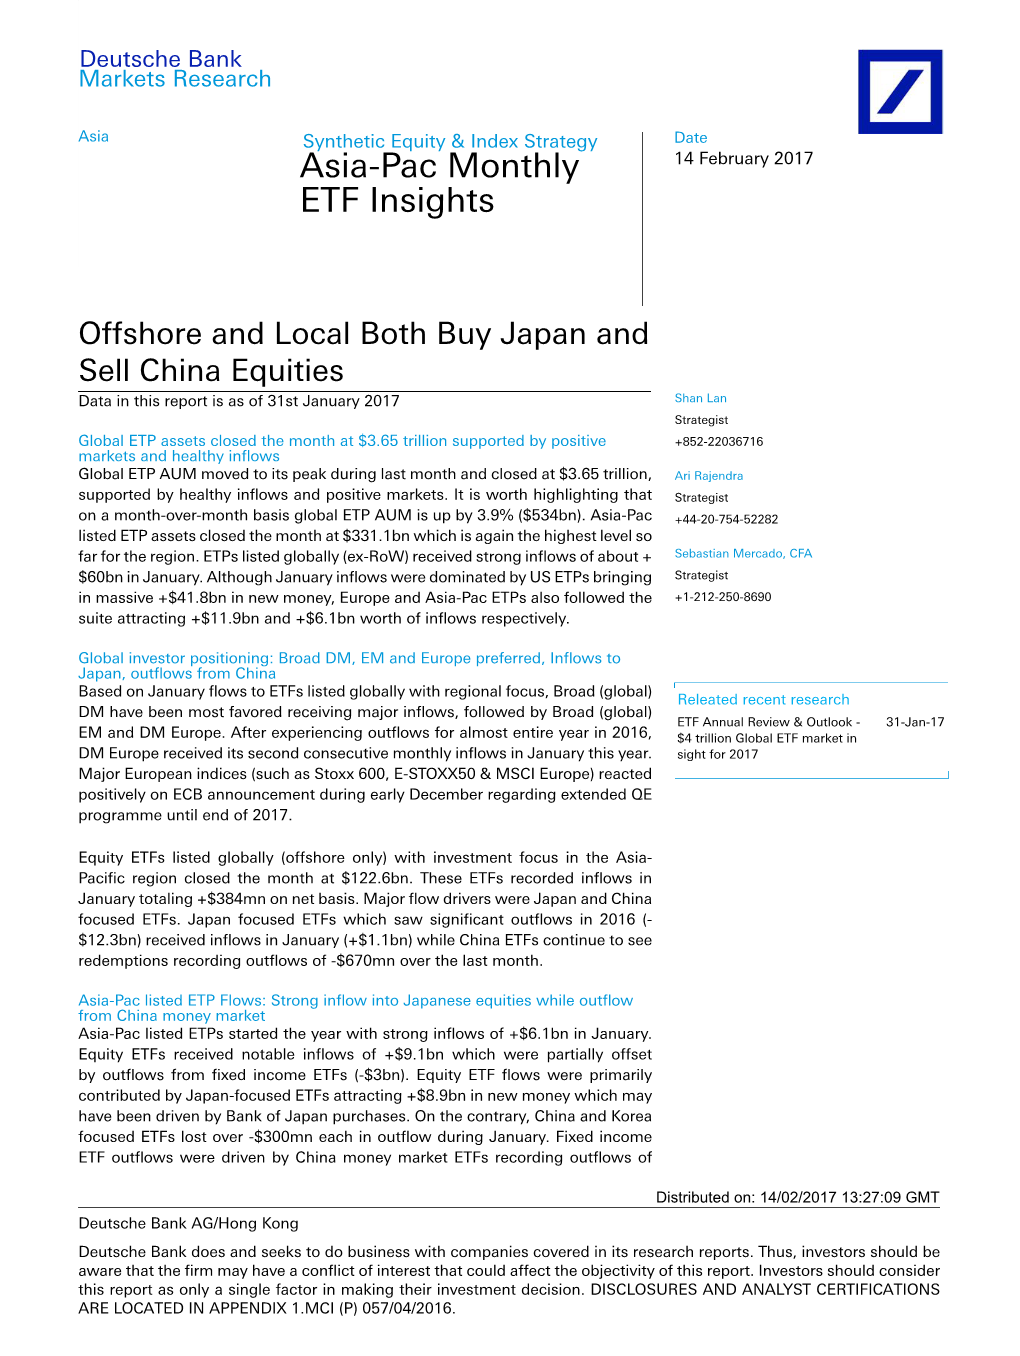 Asia-Pac Monthly ETF Insights